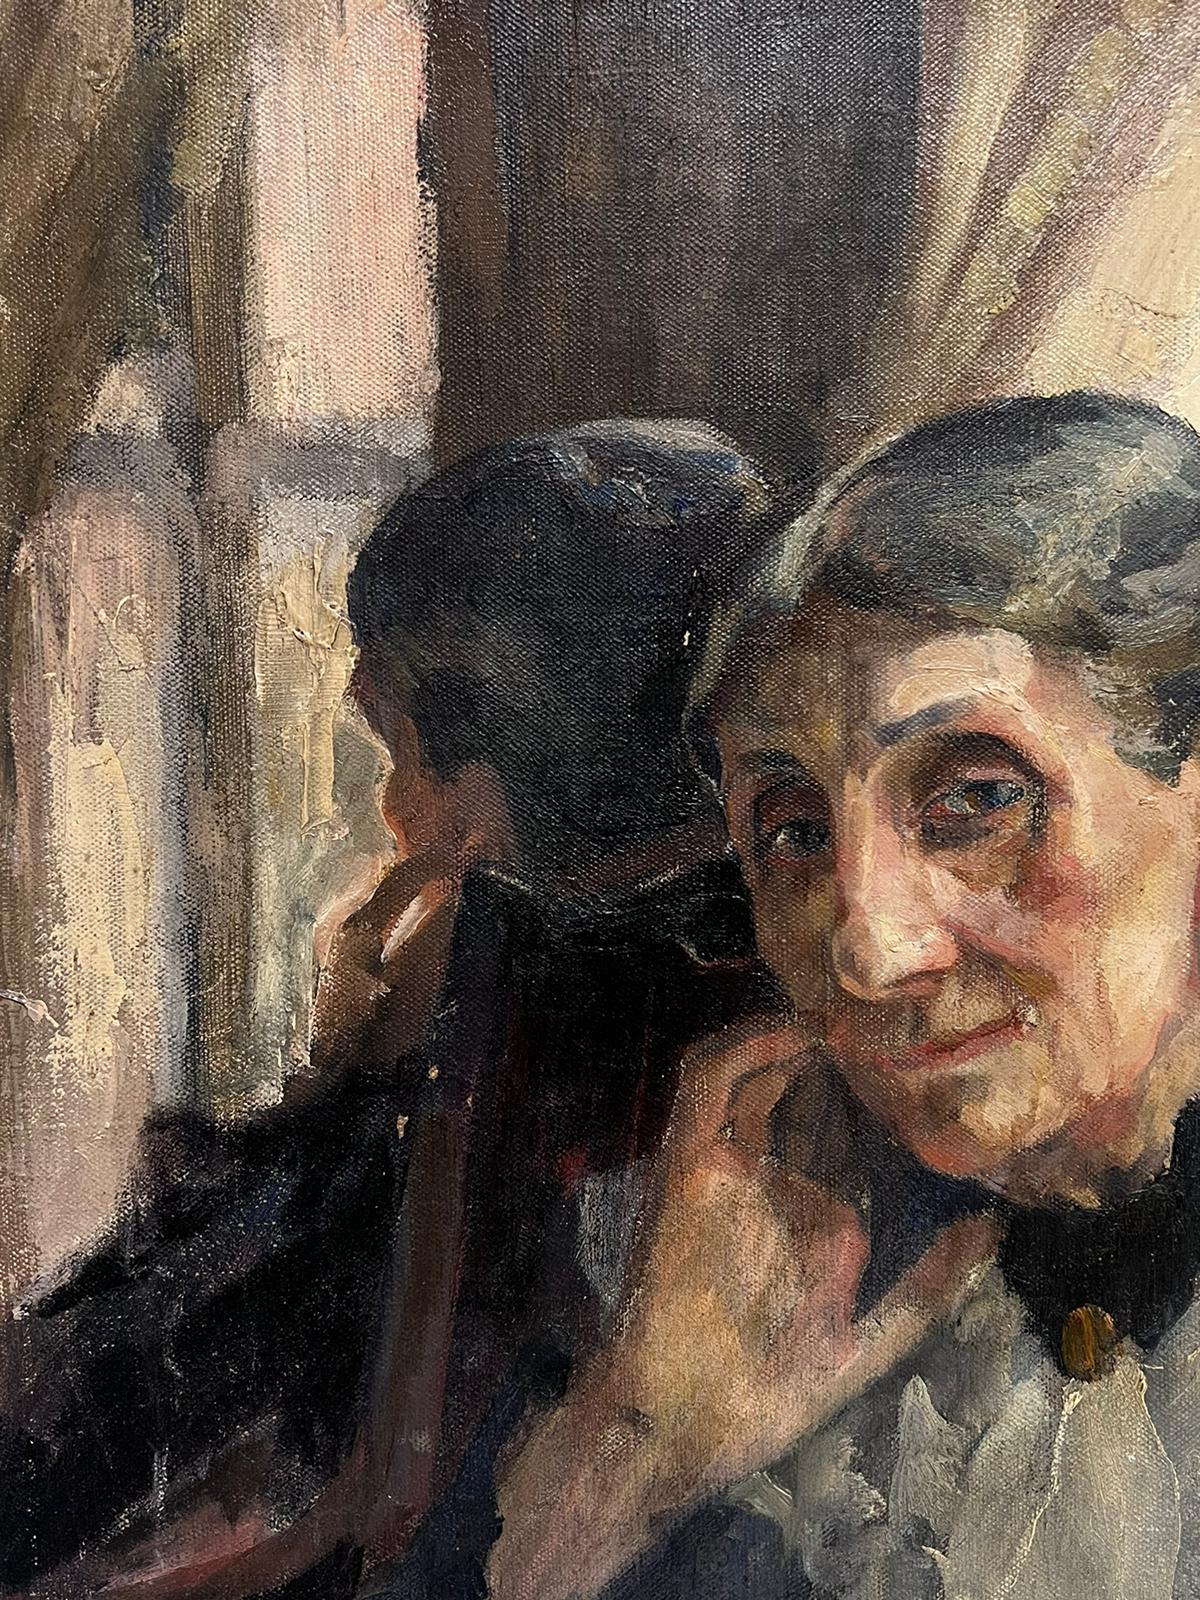 Portrait of an Elderly Lady, mirror behind
French Impressionist artist, late 19th/ early 20th century
extensively inscribed verso with details
oil on canvas
canvas: 22 x 18.5 inches
provenance: private collection, France
condition: very good and